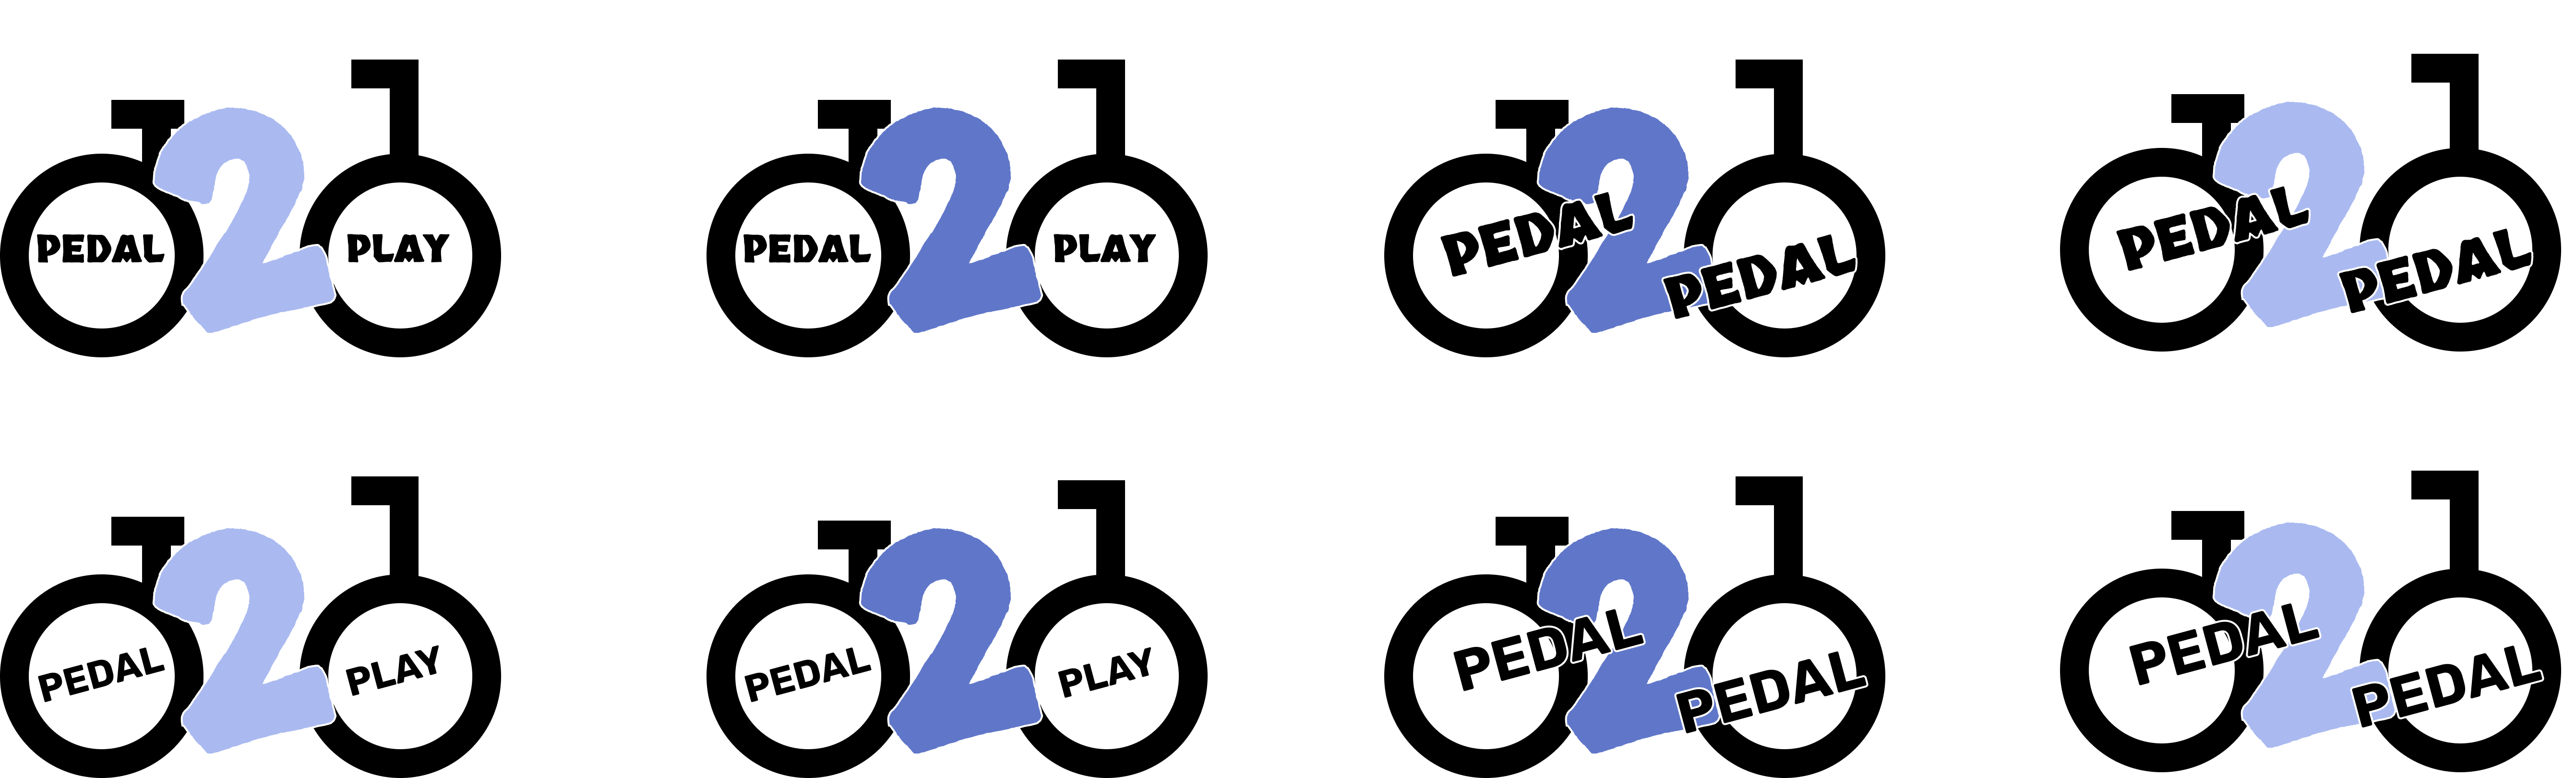 iterations of logos for Pedal2Play